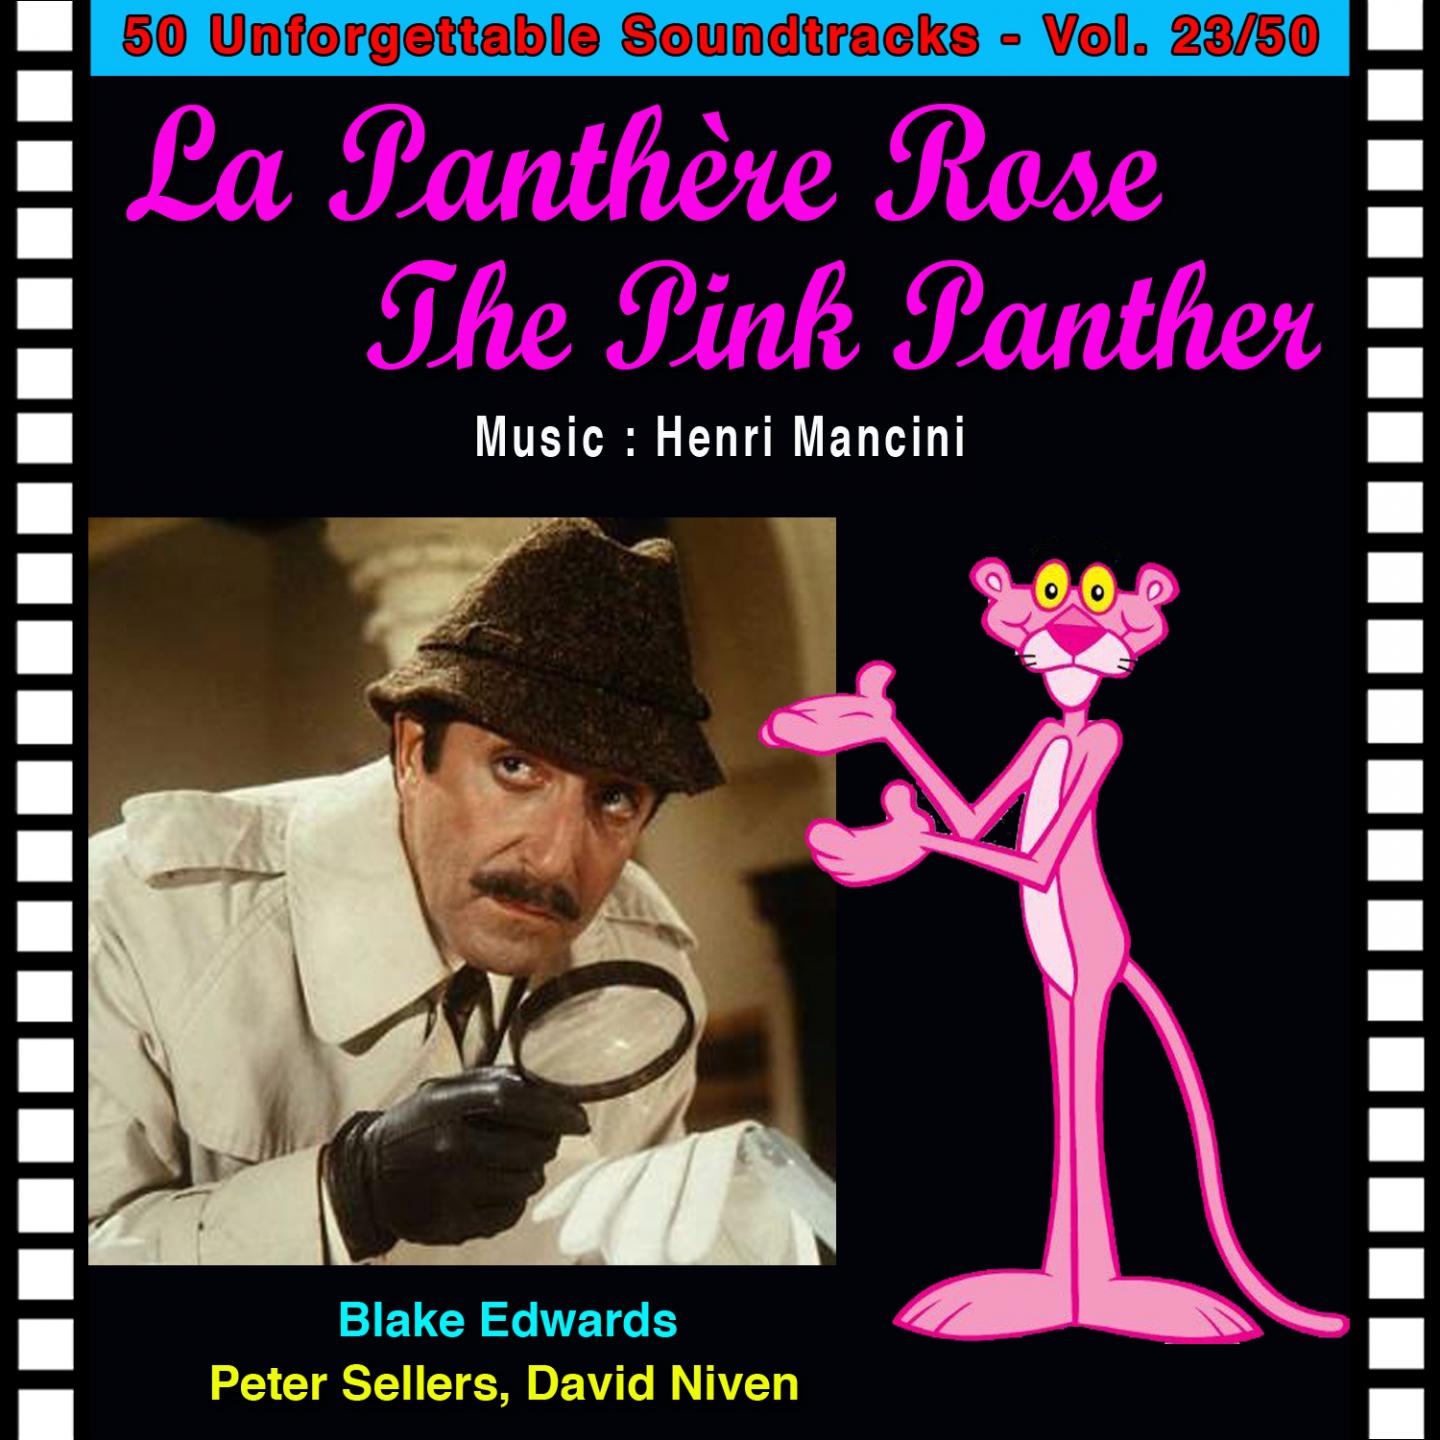 The Greatest Gift La Panthe re Rose  The Pink Panther